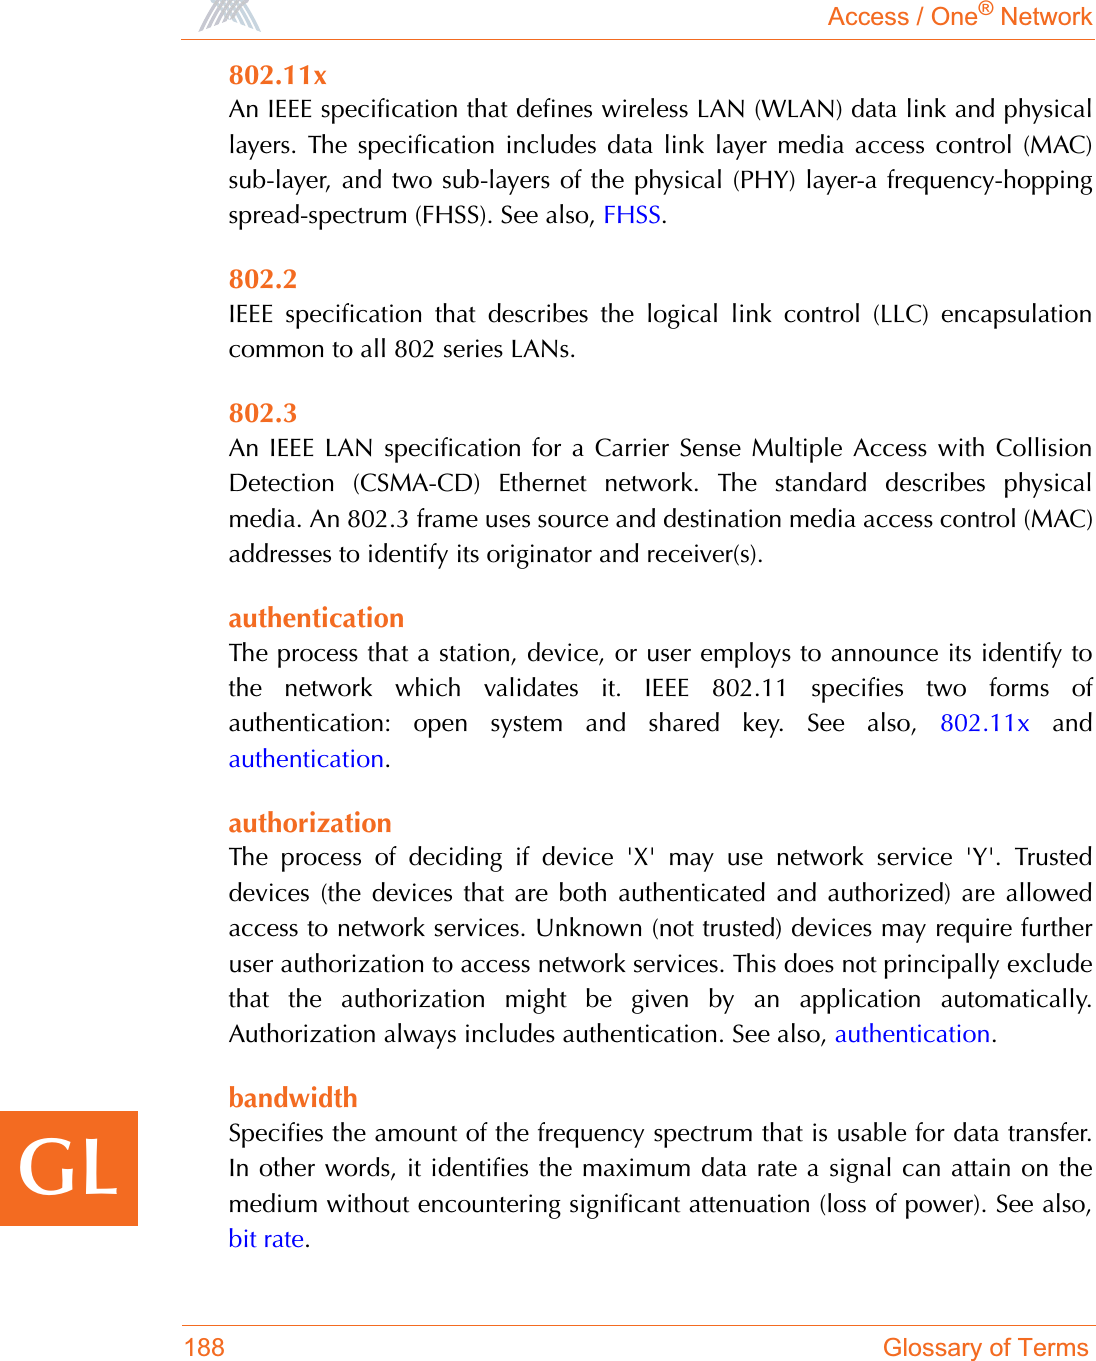 Access / One® Network188 Glossary of TermsGL802.11xAn IEEE specification that defines wireless LAN (WLAN) data link and physicallayers. The specification includes data link layer media access control (MAC)sub-layer, and two sub-layers of the physical (PHY) layer-a frequency-hoppingspread-spectrum (FHSS). See also, FHSS.802.2IEEE specification that describes the logical link control (LLC) encapsulationcommon to all 802 series LANs.802.3An IEEE LAN specification for a Carrier Sense Multiple Access with CollisionDetection (CSMA-CD) Ethernet network. The standard describes physicalmedia. An 802.3 frame uses source and destination media access control (MAC)addresses to identify its originator and receiver(s).authenticationThe process that a station, device, or user employs to announce its identify tothe network which validates it. IEEE 802.11 specifies two forms ofauthentication: open system and shared key. See also, 802.11x andauthentication.authorizationThe process of deciding if device &apos;X&apos; may use network service &apos;Y&apos;. Trusteddevices (the devices that are both authenticated and authorized) are allowedaccess to network services. Unknown (not trusted) devices may require furtheruser authorization to access network services. This does not principally excludethat the authorization might be given by an application automatically.Authorization always includes authentication. See also, authentication.bandwidthSpecifies the amount of the frequency spectrum that is usable for data transfer.In other words, it identifies the maximum data rate a signal can attain on themedium without encountering significant attenuation (loss of power). See also,bit rate.